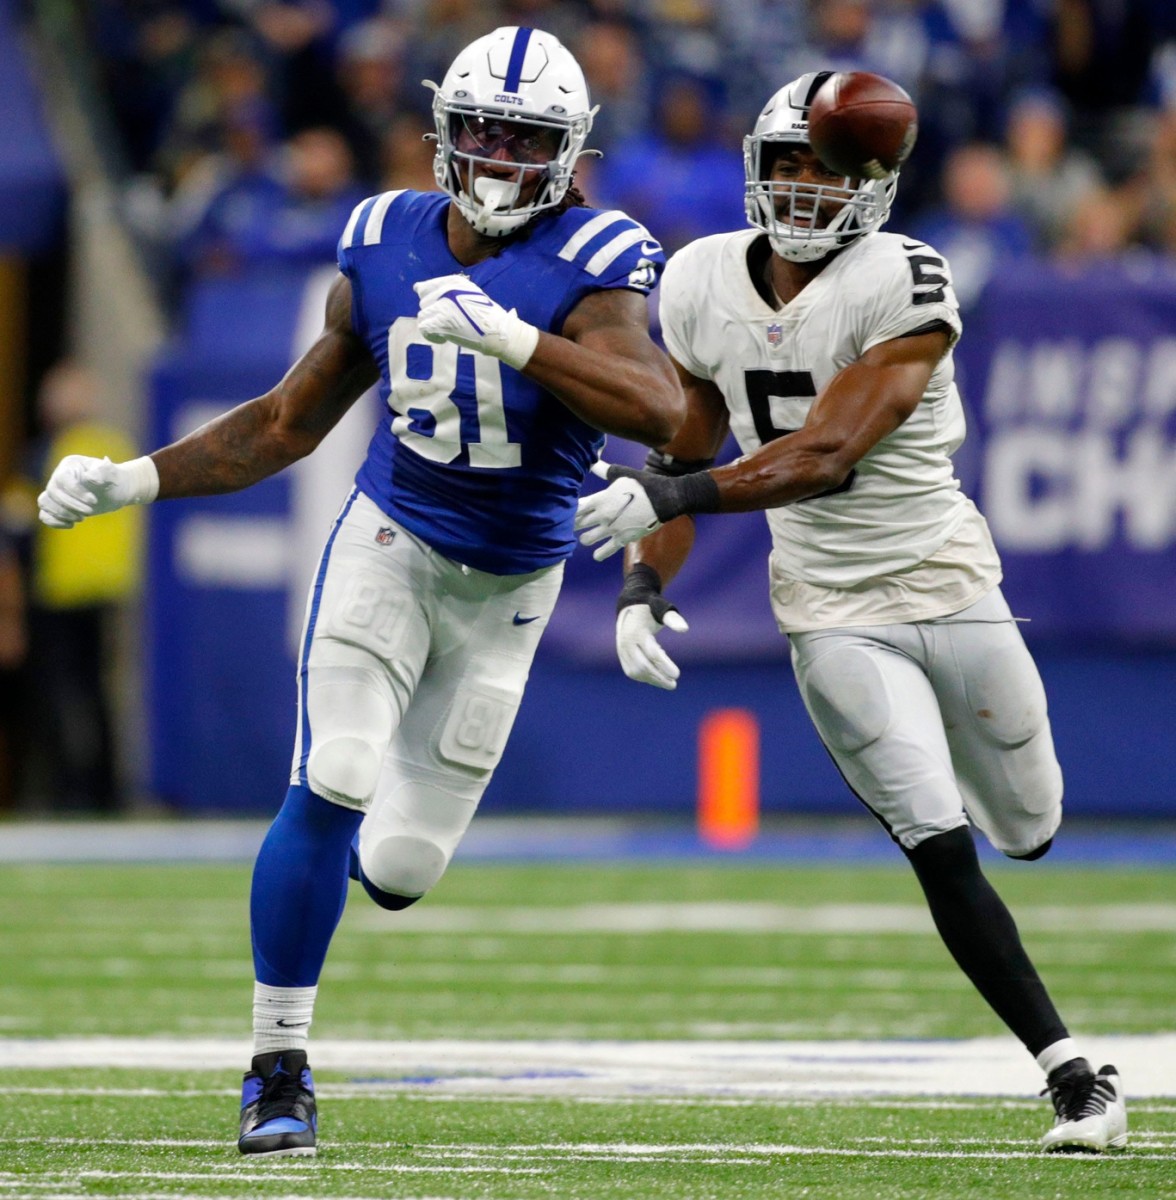 A pass intended for Indianapolis Colts tight end Mo Alie-Cox (81) is broken up by Las Vegas Raiders linebacker Divine Deablo (5). © Robert Scheer/IndyStar / USA TODAY NETWORK